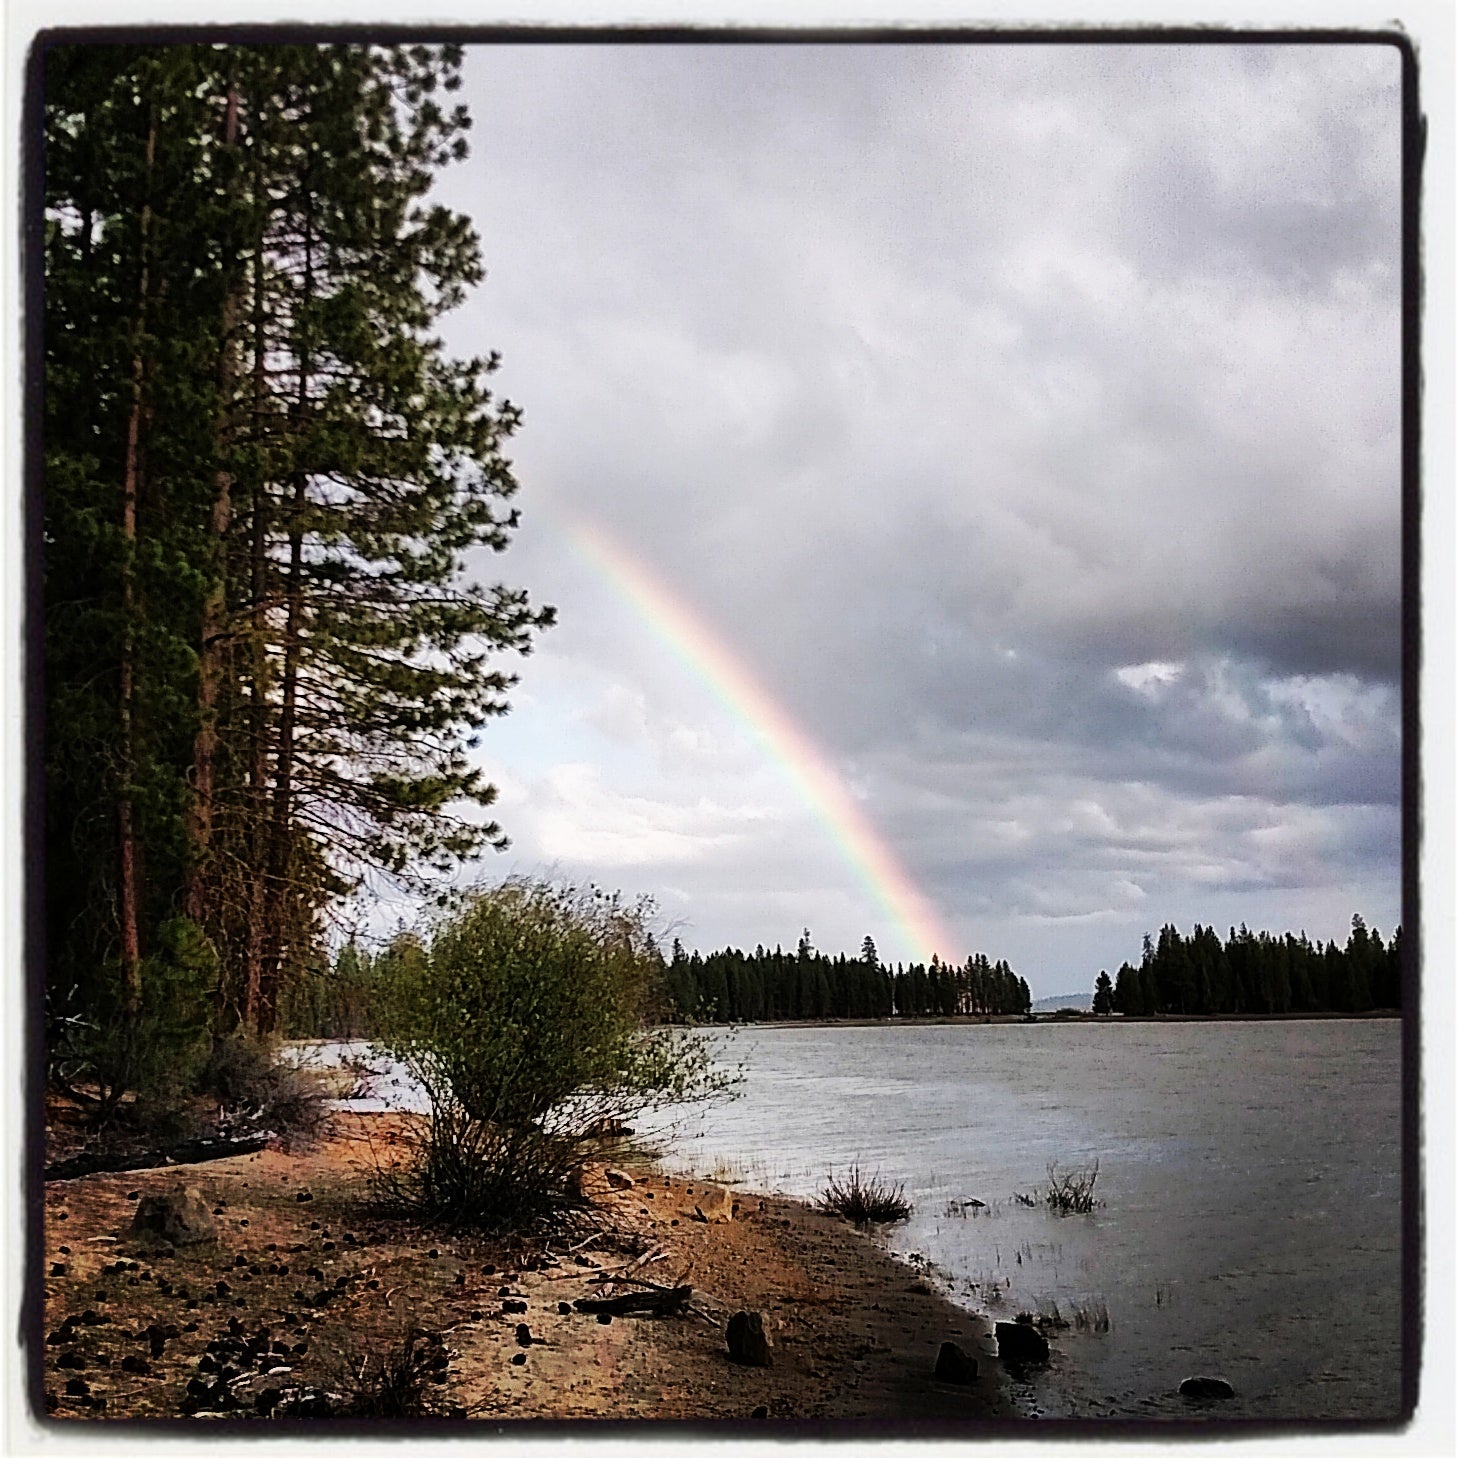 Camper submitted image from South Twin Lake Campground - 2